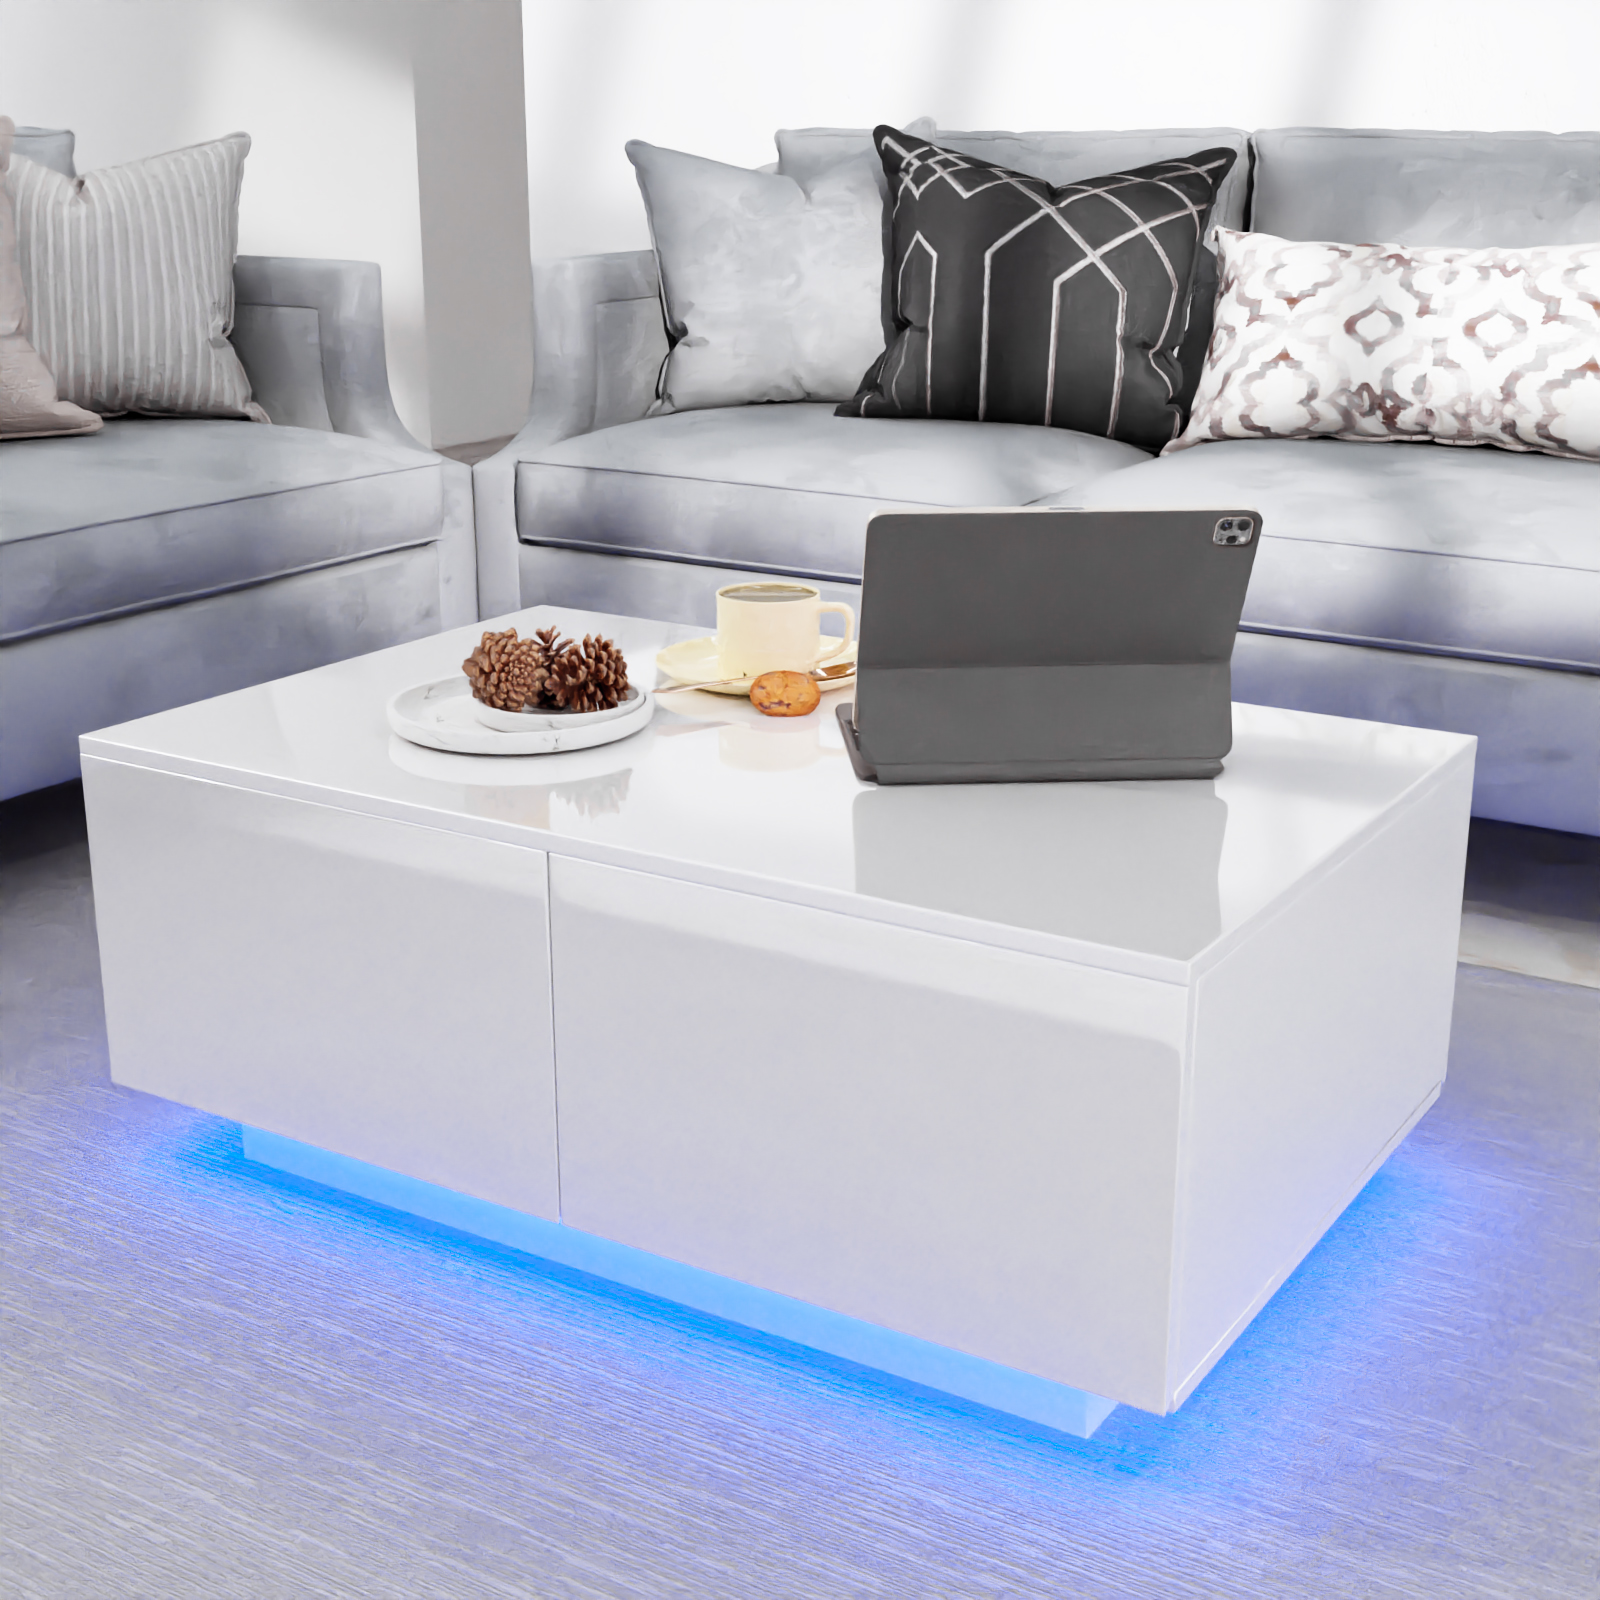 Hommpa Rectangular LED Coffee Table with 4 Drawers High Gloss White Finish Modern Living Room Furniture Sofa Side Cocktail Table 37.4 x 23.6 x 15.4 inches - image 1 of 11